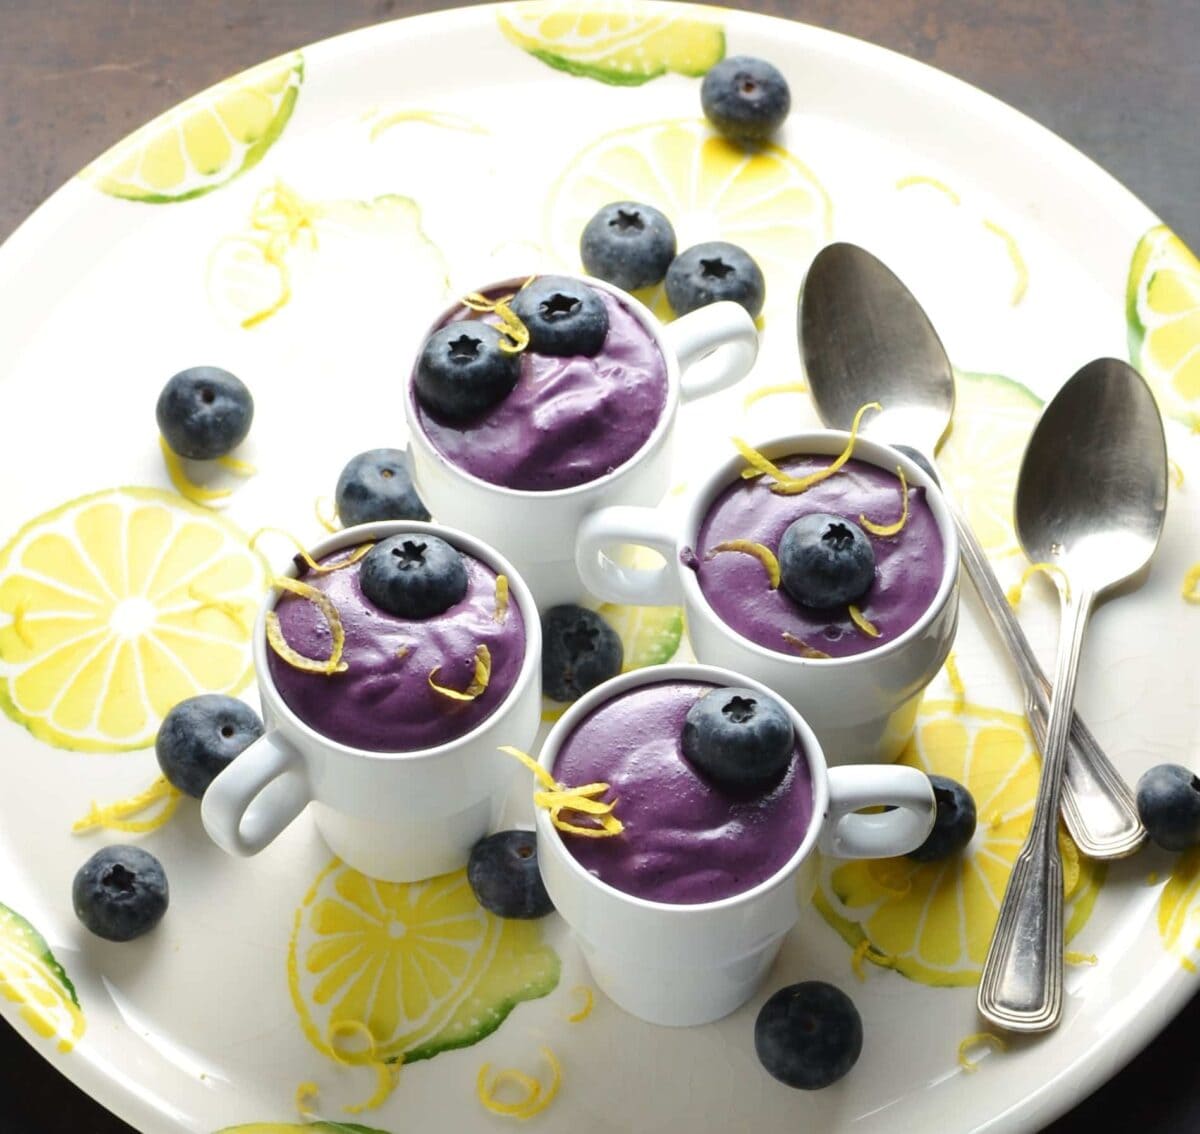 Blueberry cream cheese dessert in 4 white cups with garnish of blueberries and lemon zest, with 2 spoons on white plate with lemon pattern.